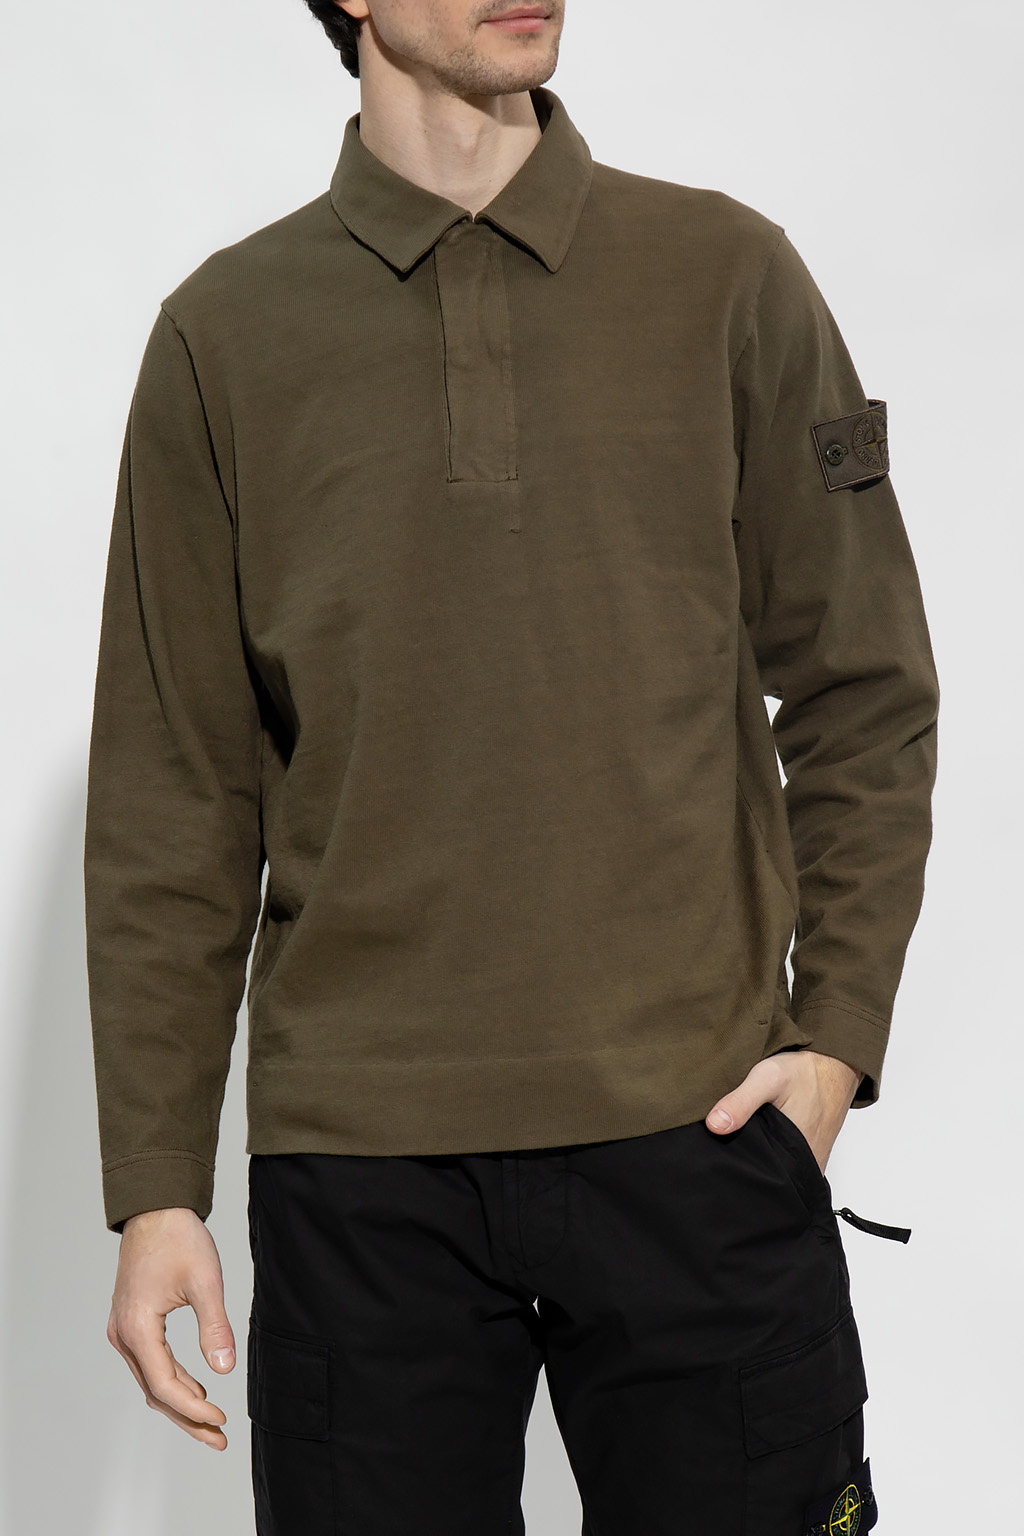 Stone Island 'Ghost Piece' long-sleeved T-shirt | Men's Clothing